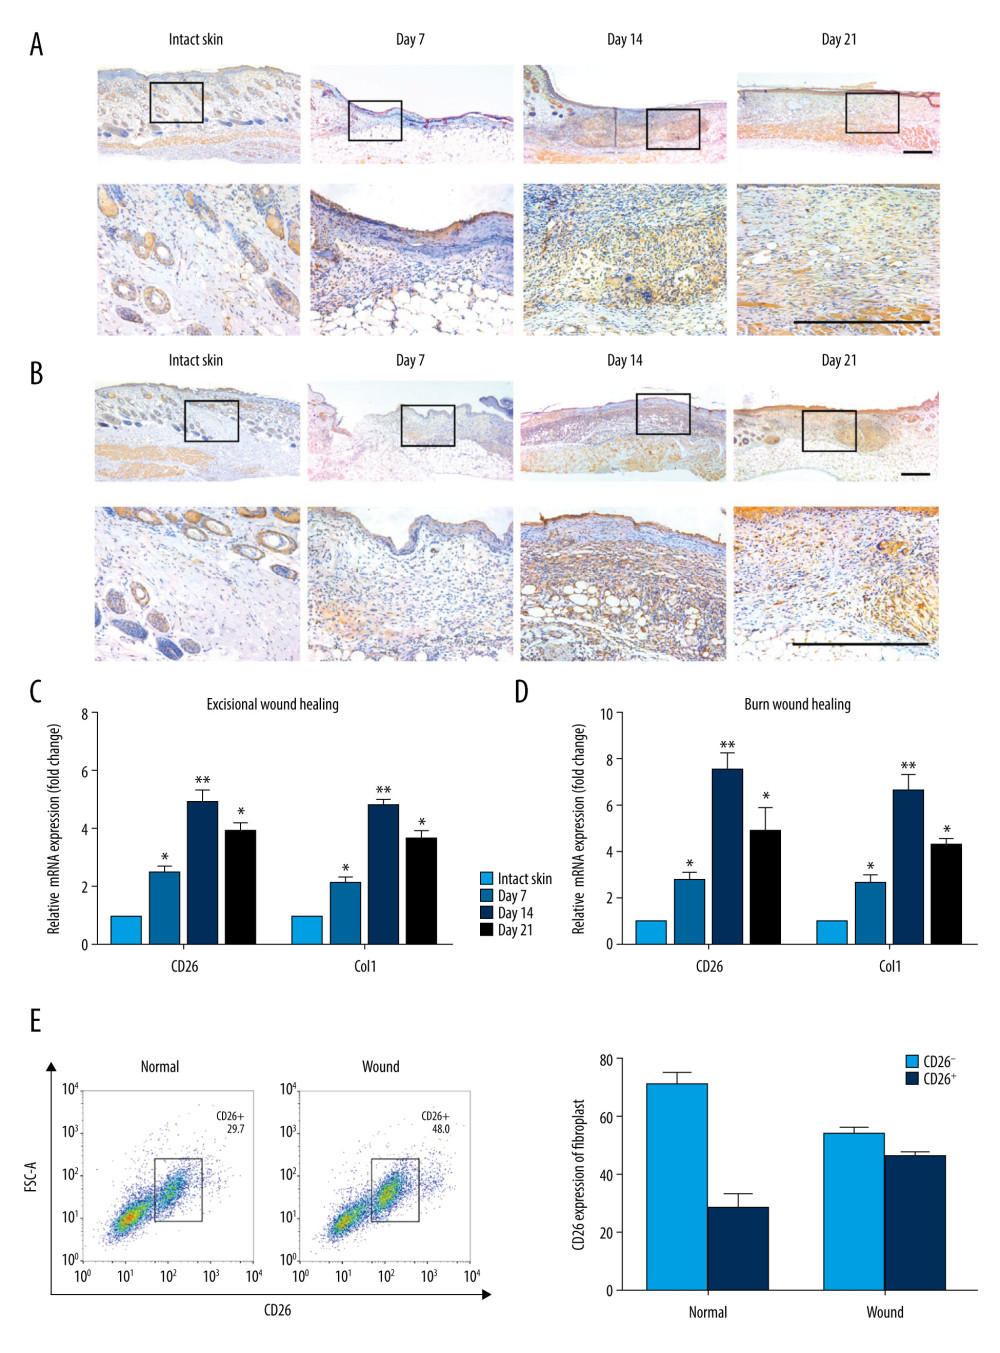 Patterns of CD26 Expression in Intact Normal Skin and Skin Wound Models. (A) Immunohistochemical staining of CD26 in samples of excisional wounds on days 7, 14 and 21. The lower panel corresponds to the high magnification area in the upper panel. (B) Immunohistochemical staining of CD26 in burn wound samples on days 7, 14, and 21. The lower panel corresponds to the high magnification area in the upper panel. (C) The mRNA expression levels of CD26 and Col1 were significantly increased in samples of skin excisional wounds compared with normal skin (n=5). (D) The mRNA expression levels of CD26 and Col1 were significantly increased in burn wound samples compared with normal skin (n=5). (E) The proportion of CD26+ fibroblasts was significantly higher in WFs than in NFs (detected by FACS and its quantification) (n=5). Scale bar: 200 μm, t test, * P<0.05 vs Intact skin group, ** P<0.01 vs Intact skin group.